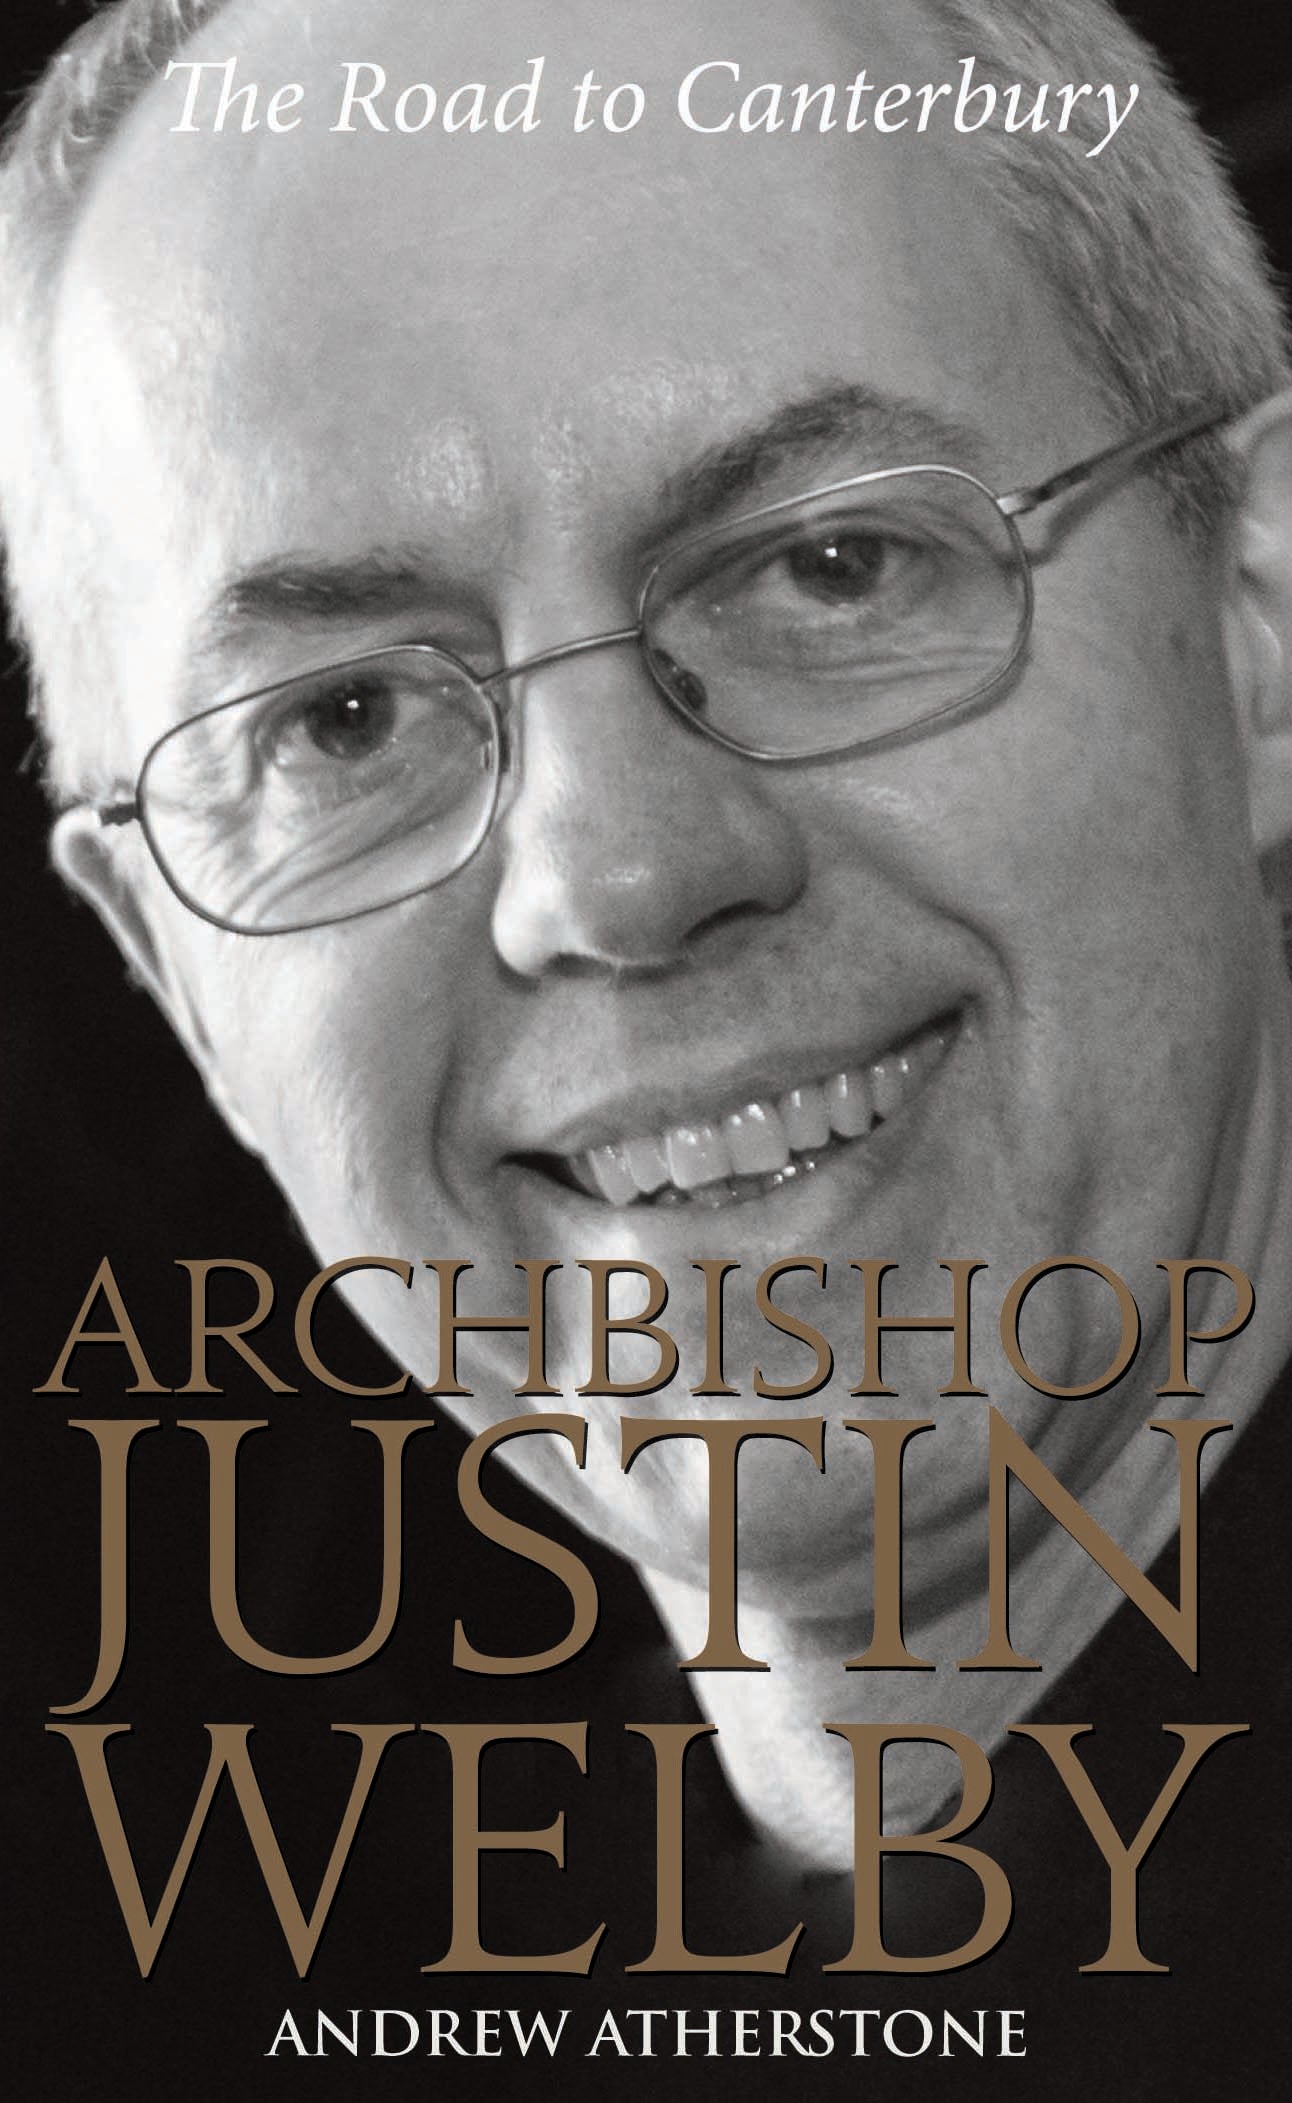 Image of Archbishop Justin Welby other